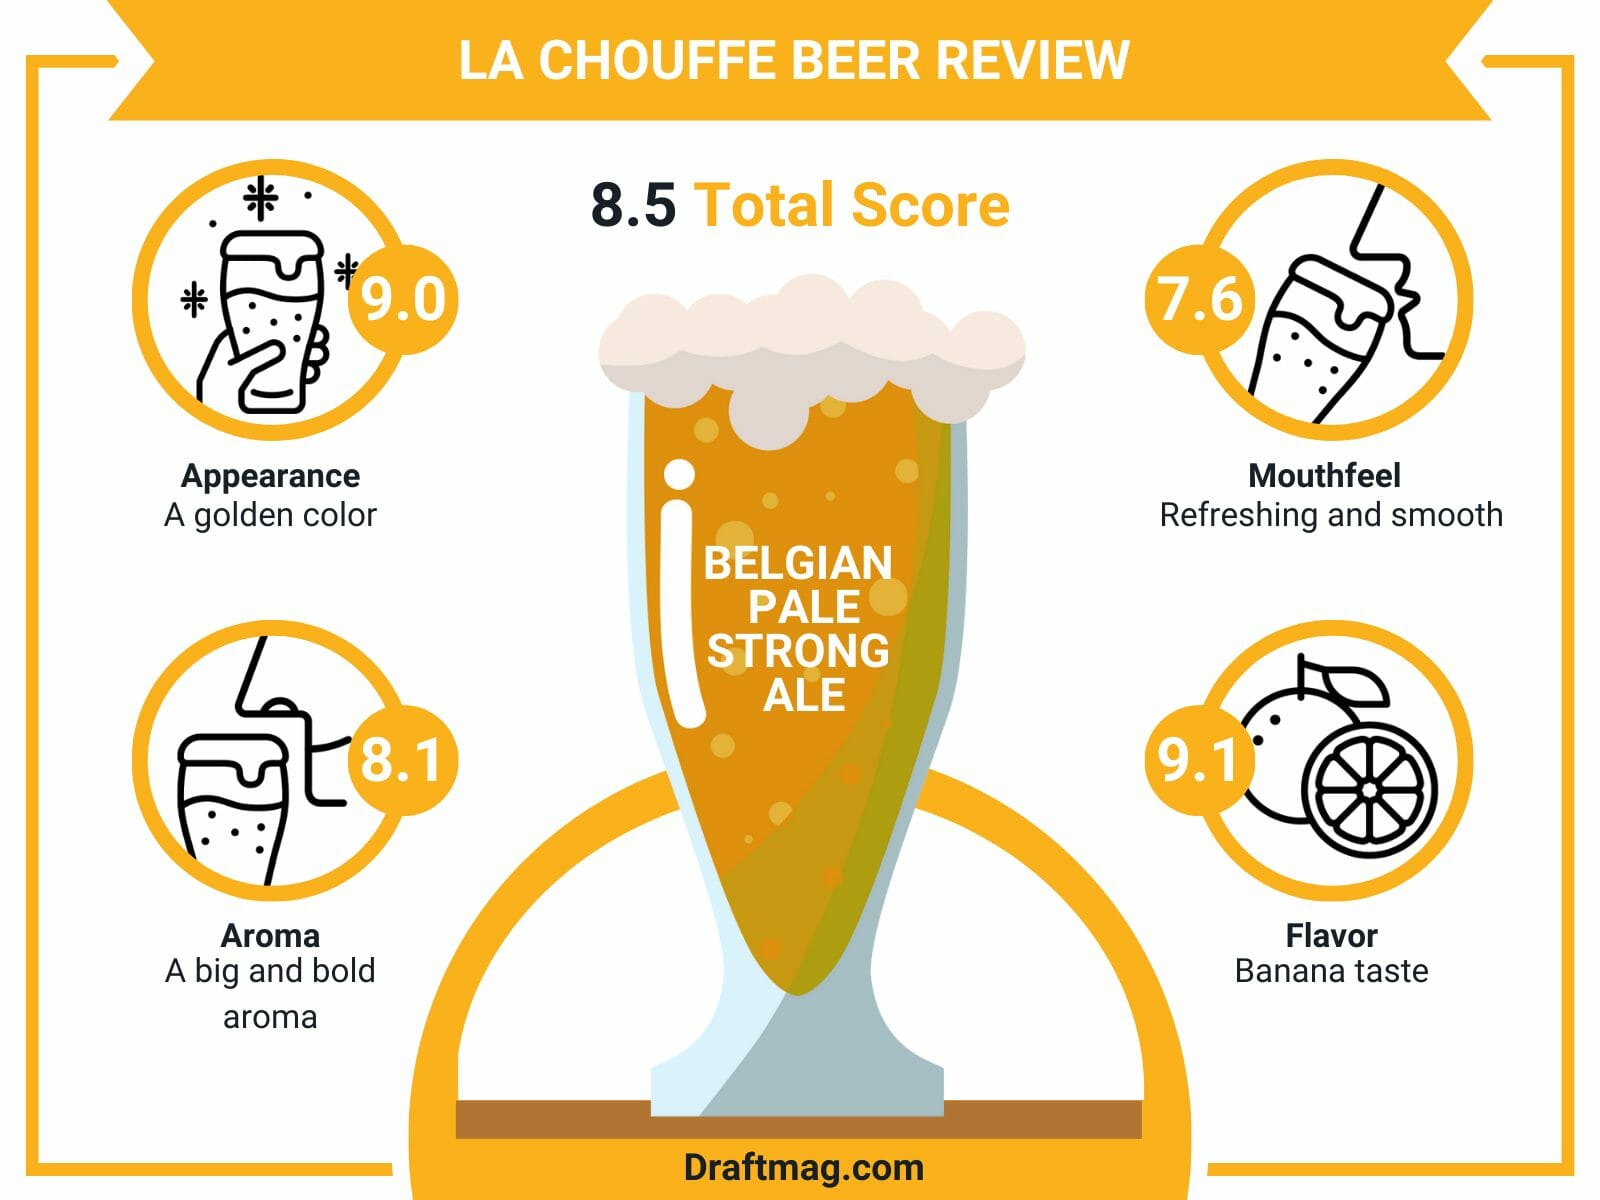 La chouffe beer review infographic